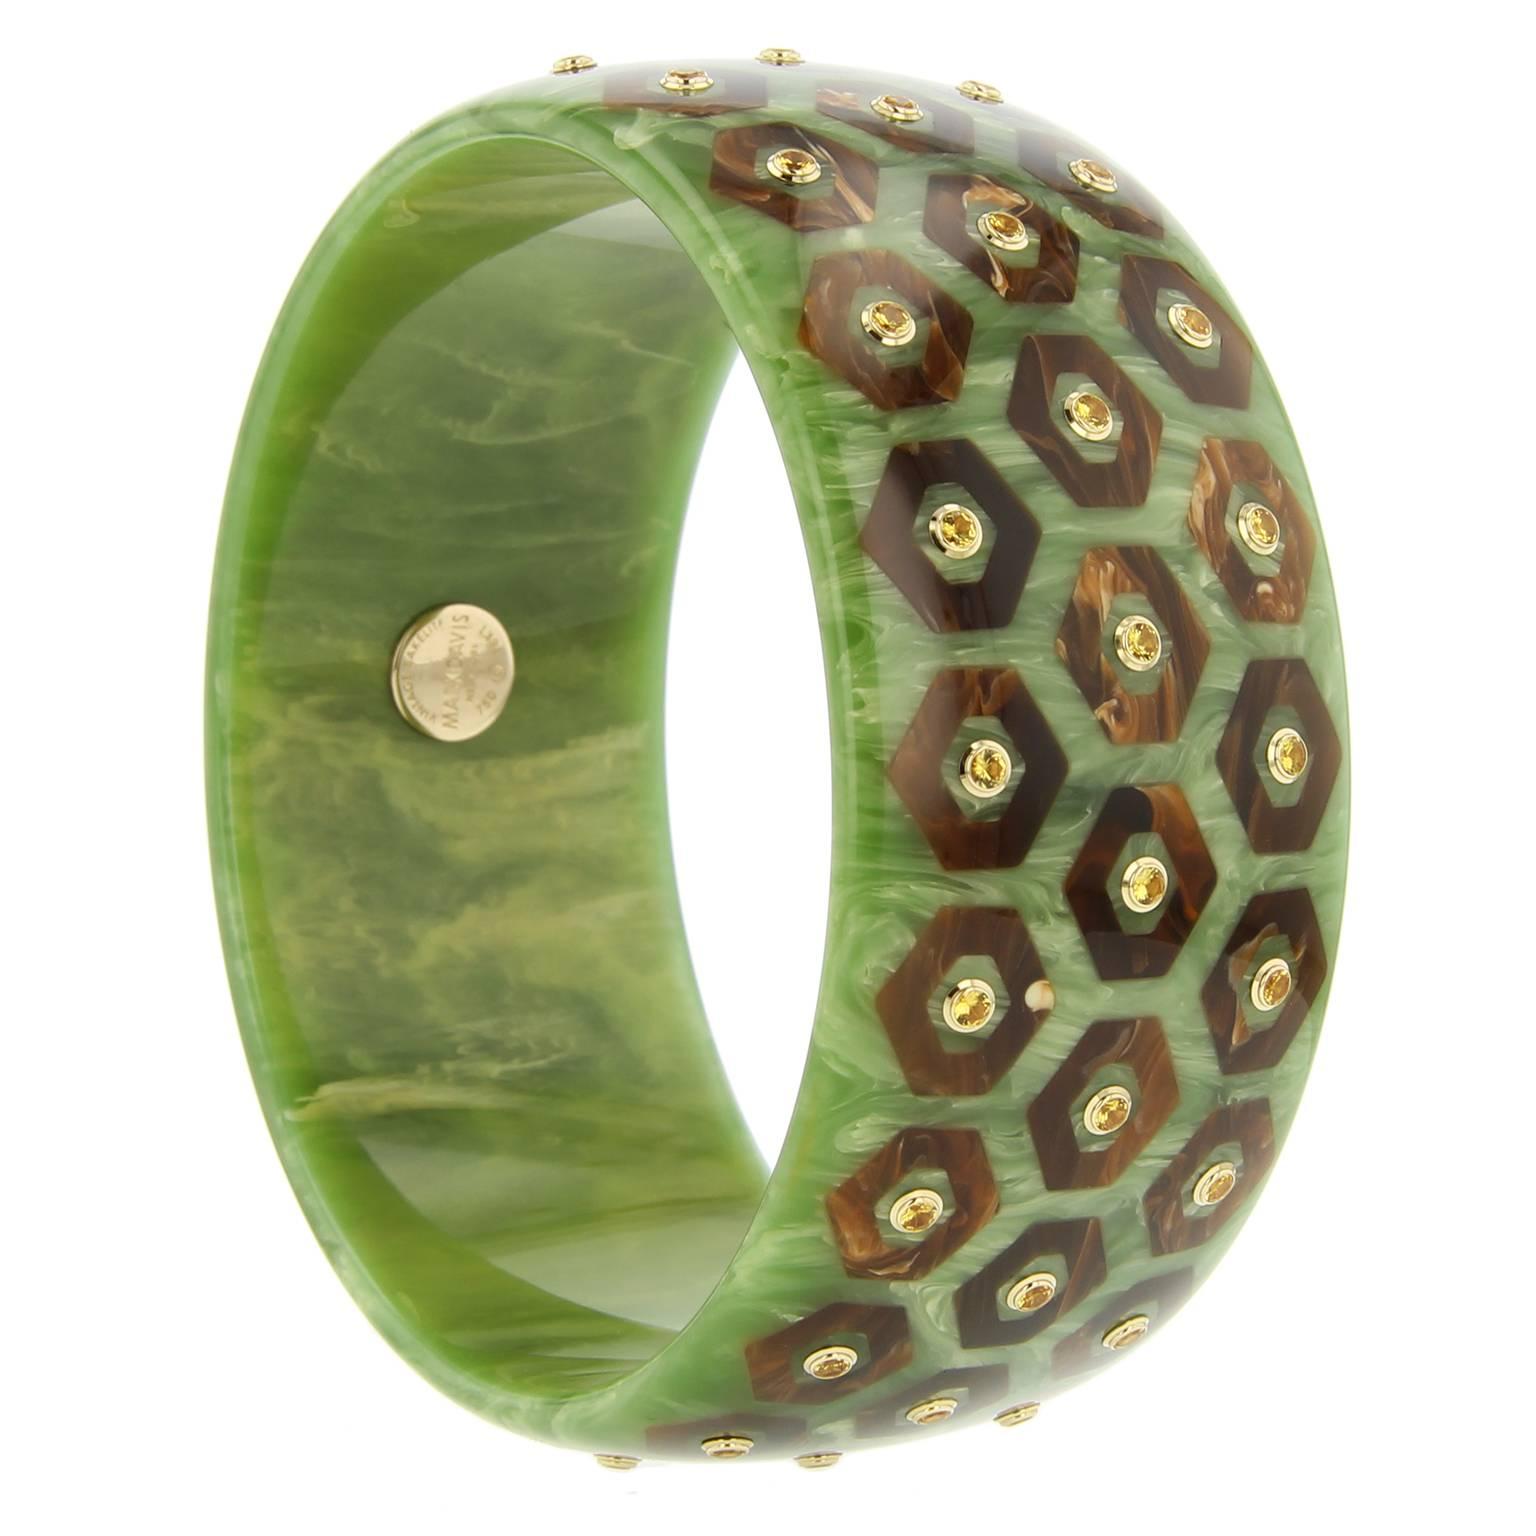 This Mark Davis bangle was handcrafted of marbled green vintage bakelite and meticulously inlayed with hexagonal shaped pieces of brown bakelite. Each hexagon is centered with a fine yellow sapphire, bezel-set in 18k yellow gold. 

Full details